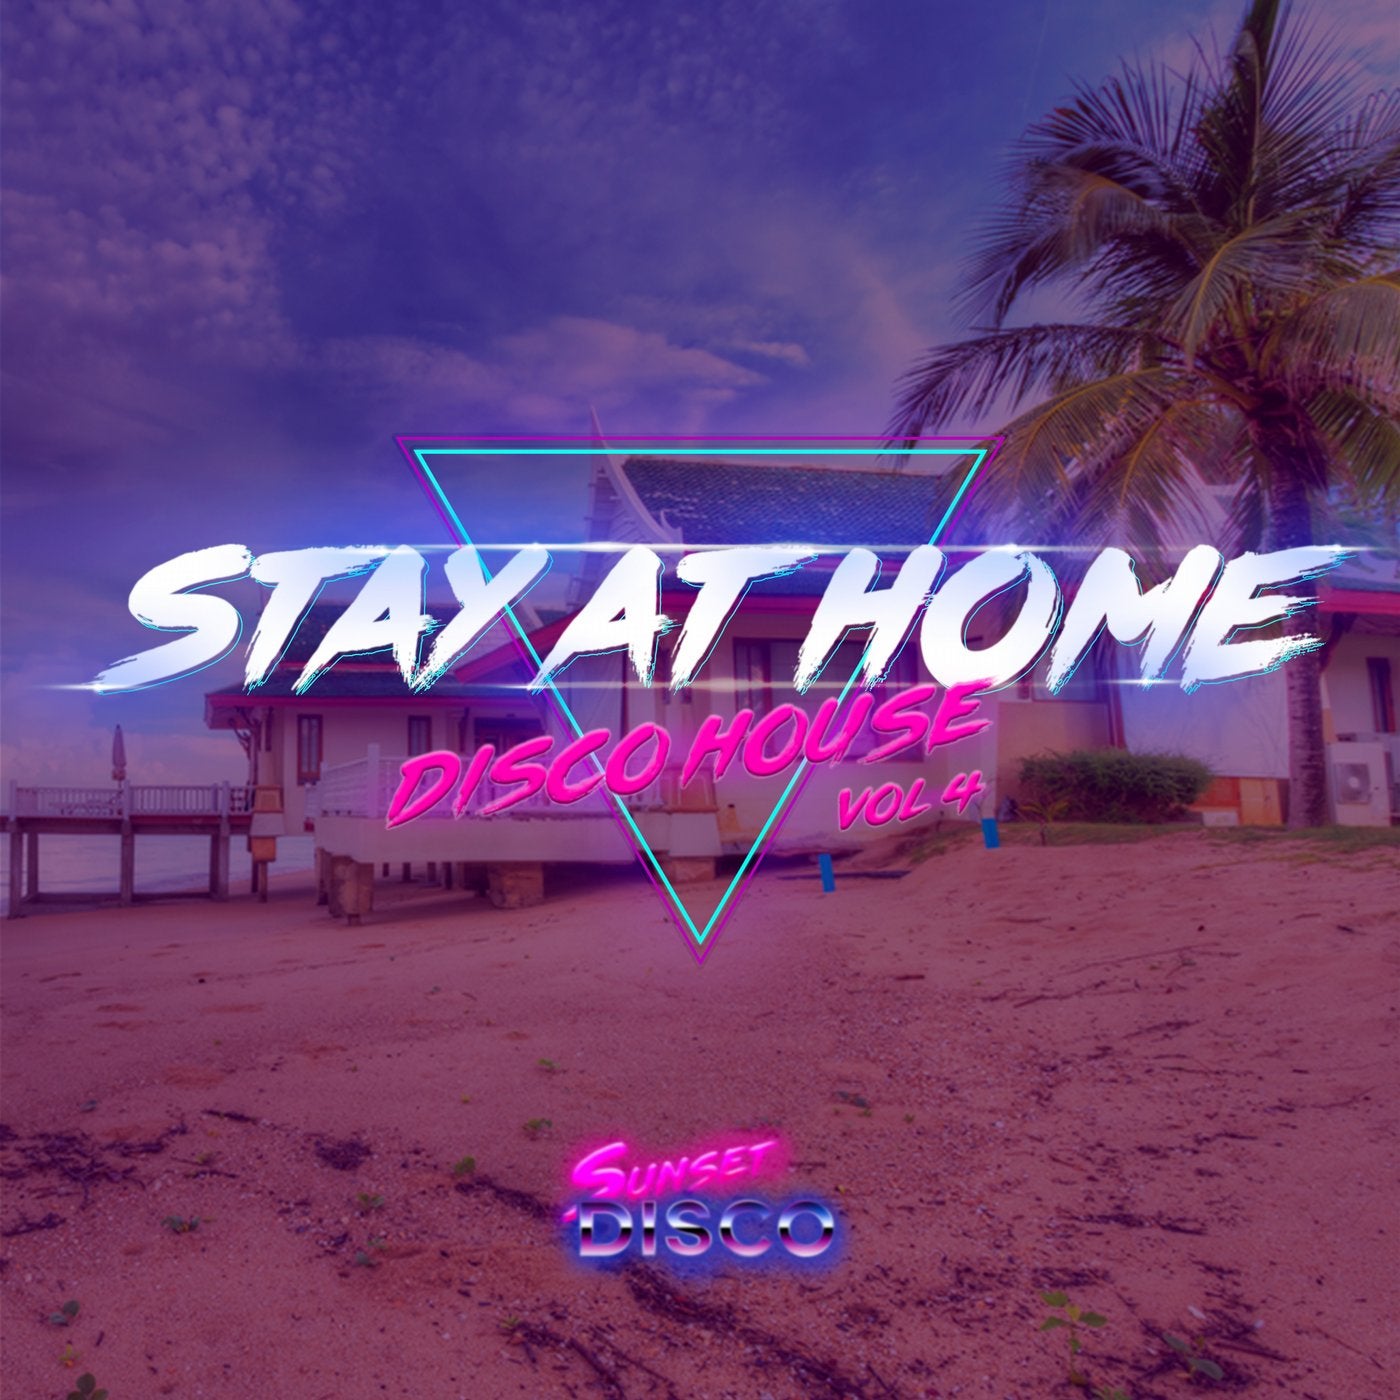 Stay At Home: Disco House Vol.4